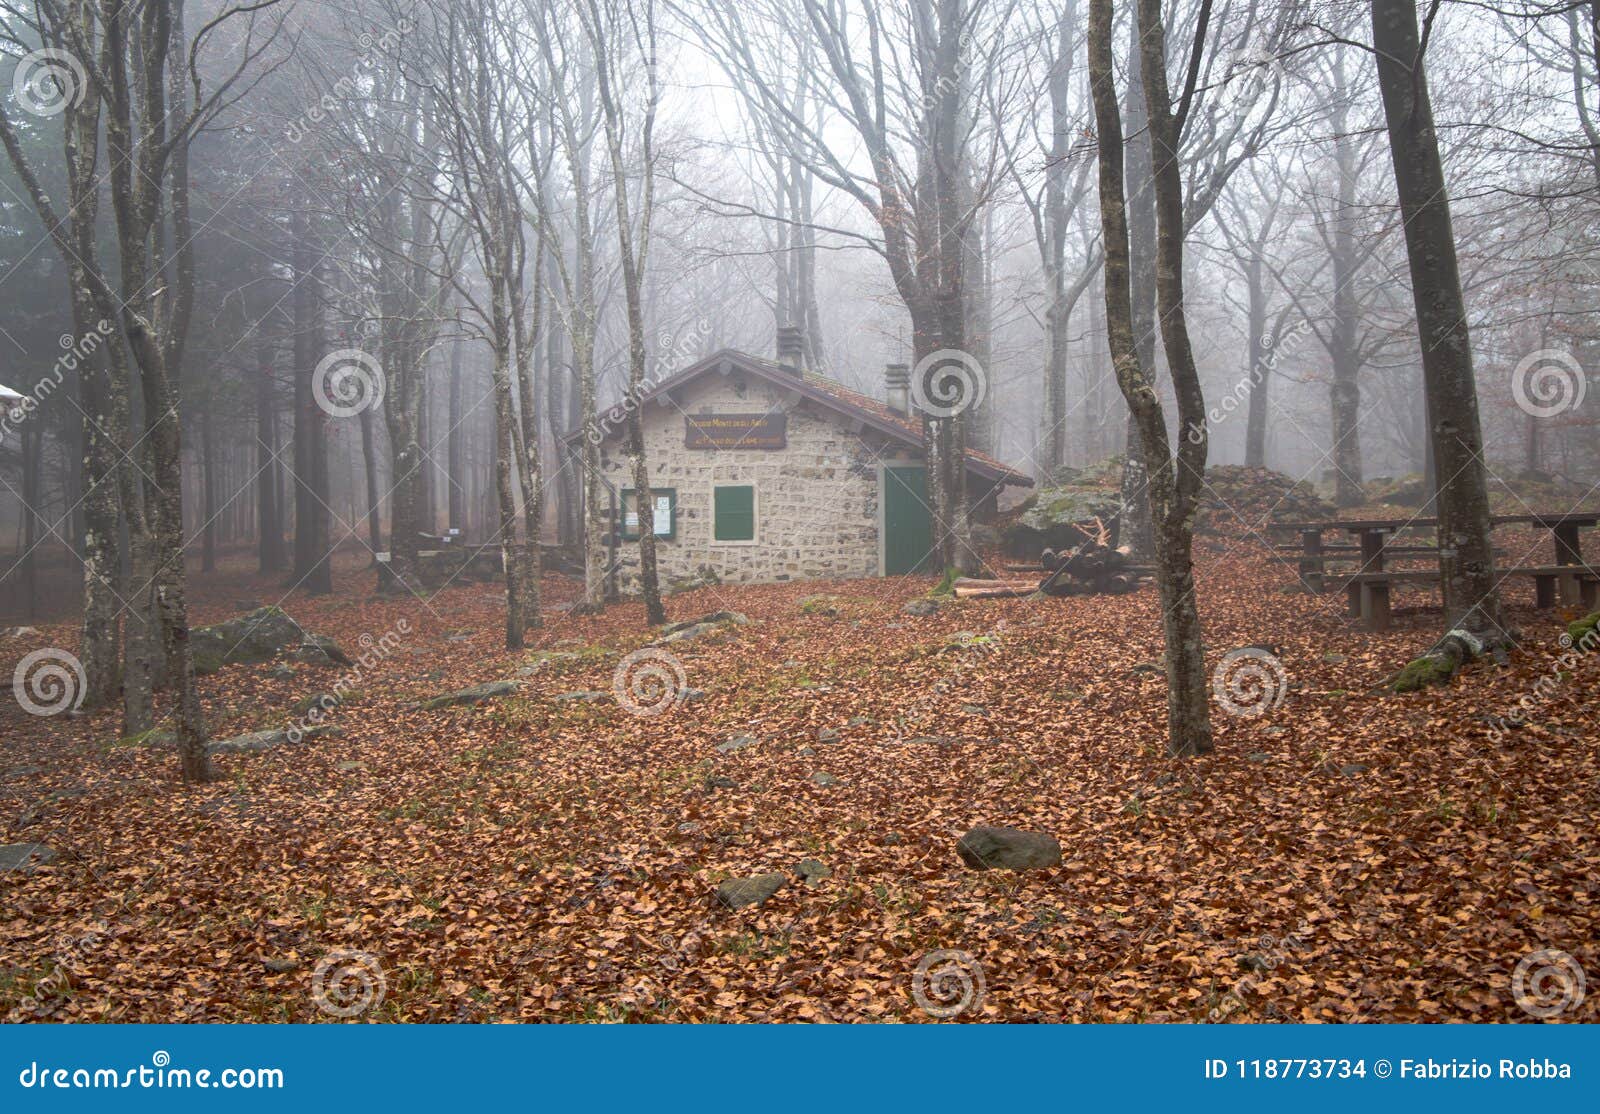  house in the beeches forest.